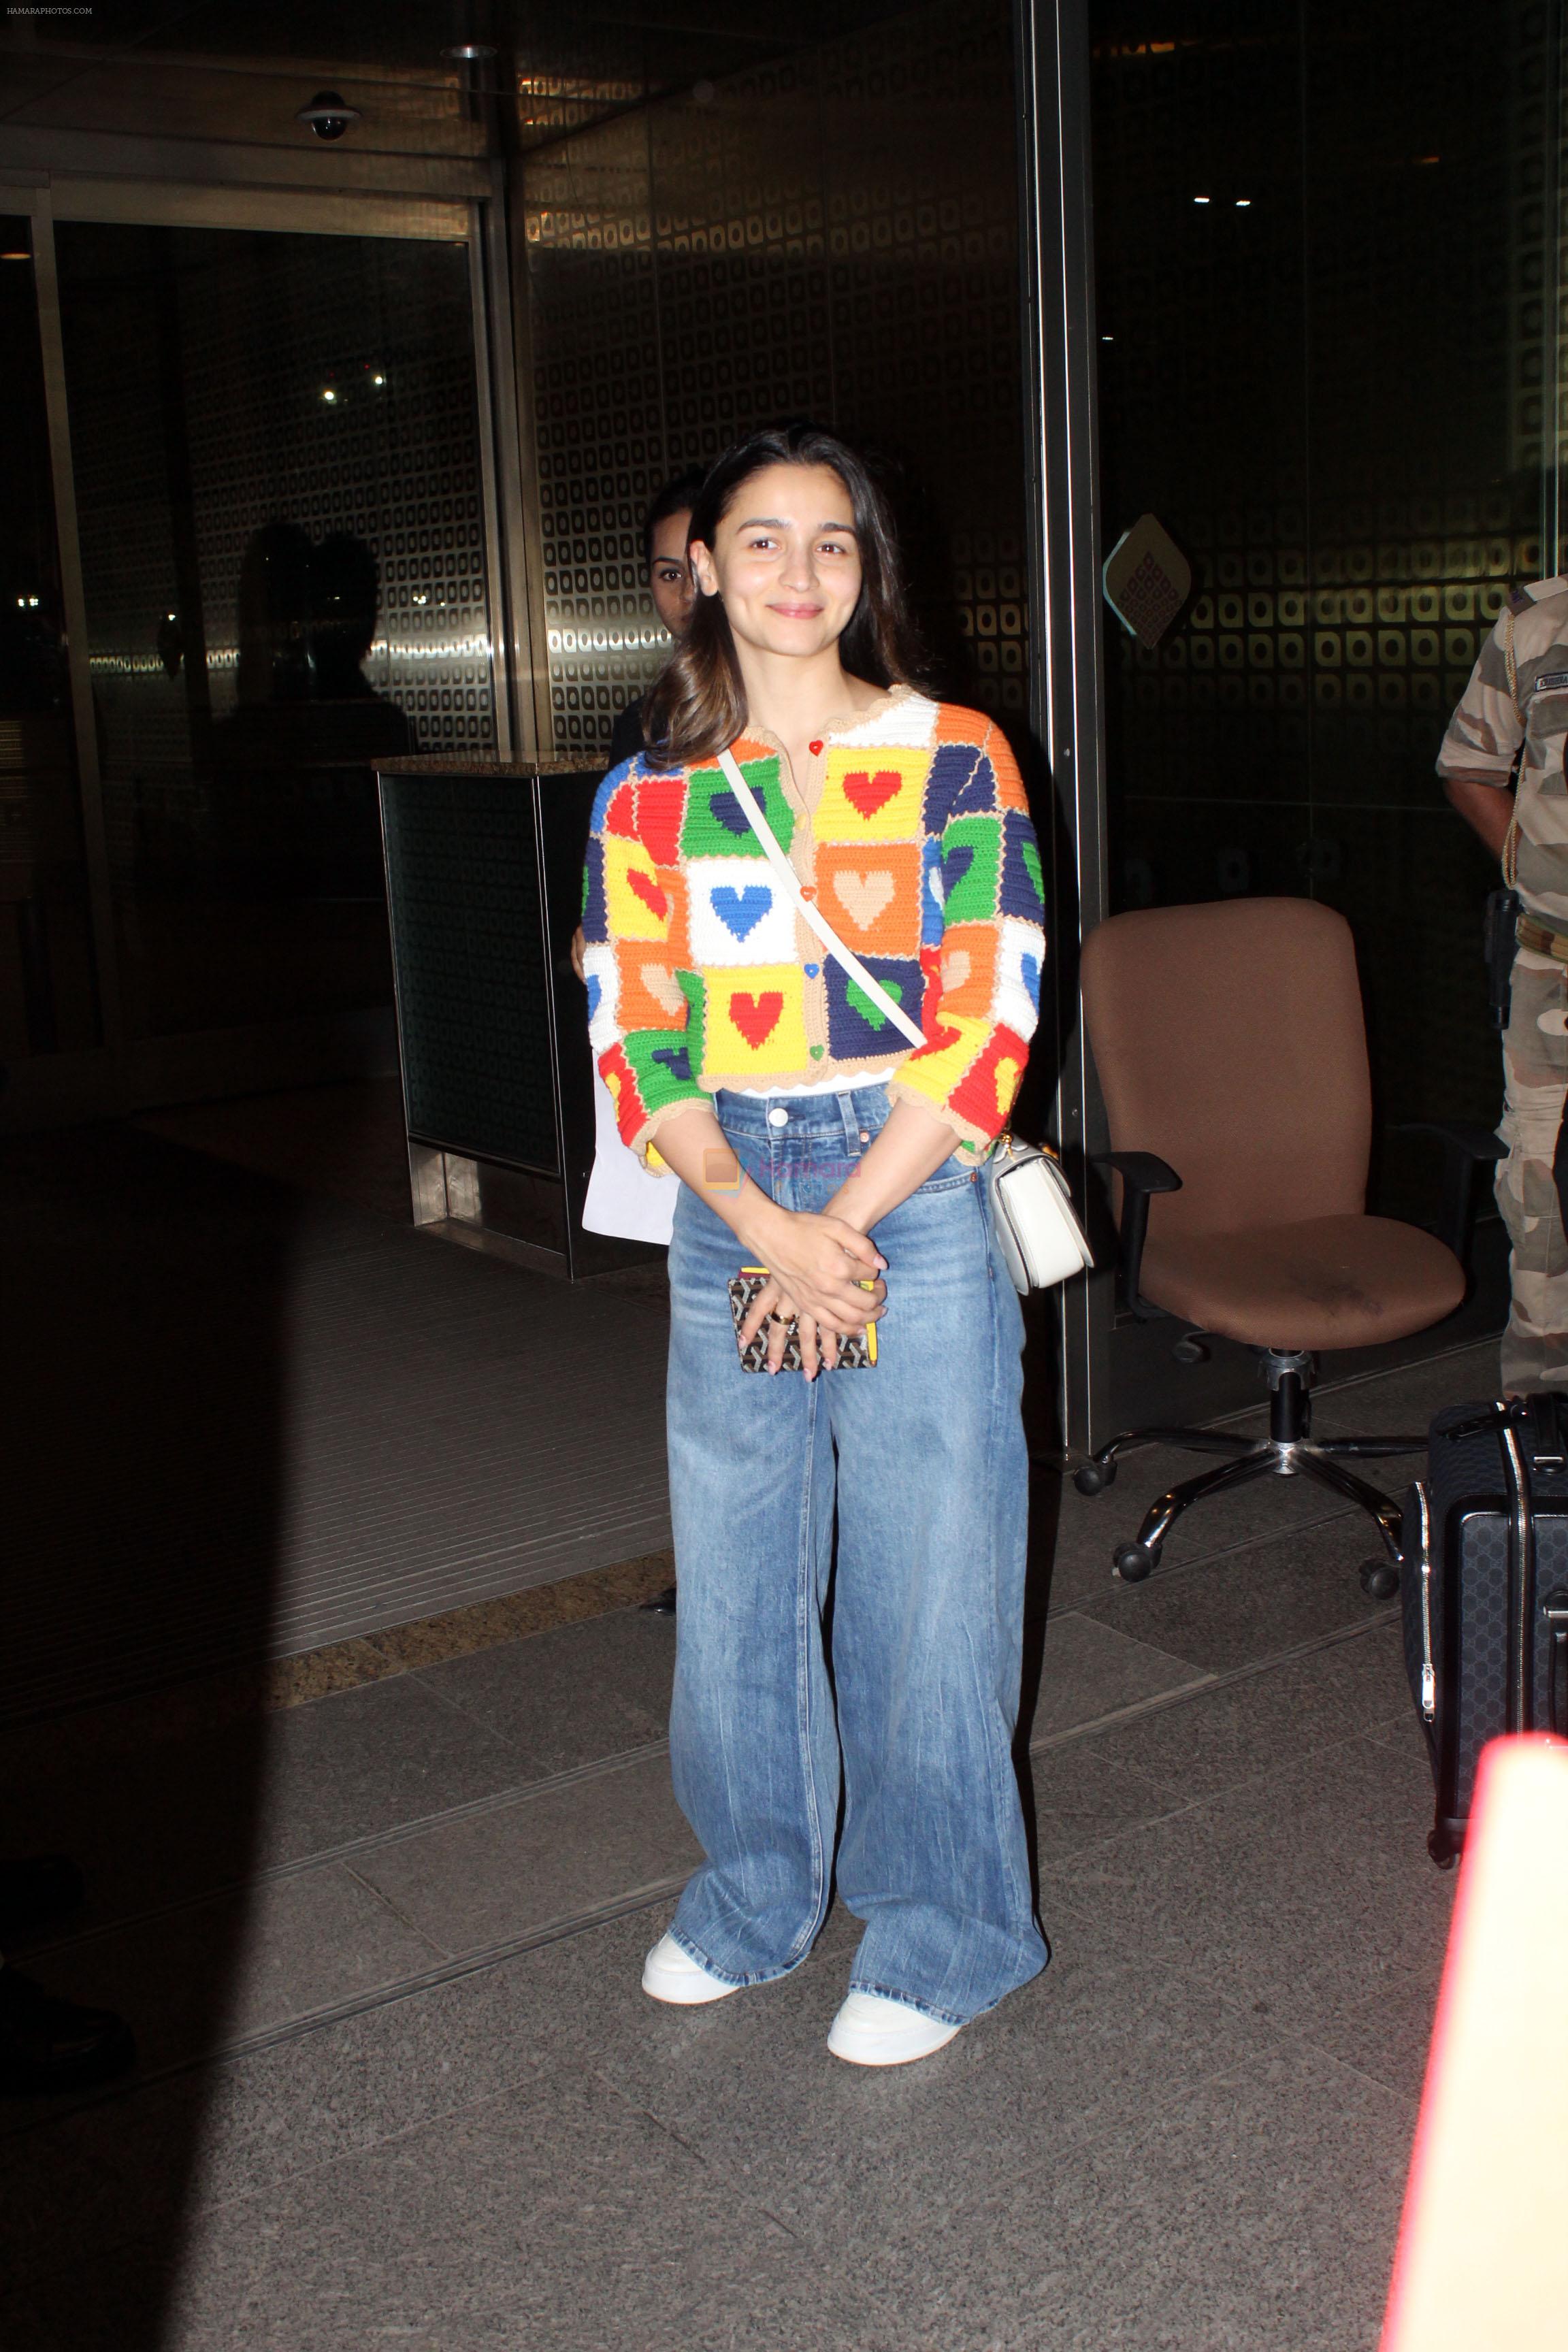 Alia Bhatt spotted at the airport wearing blue jeans and colorful top on 15 Jun 2023